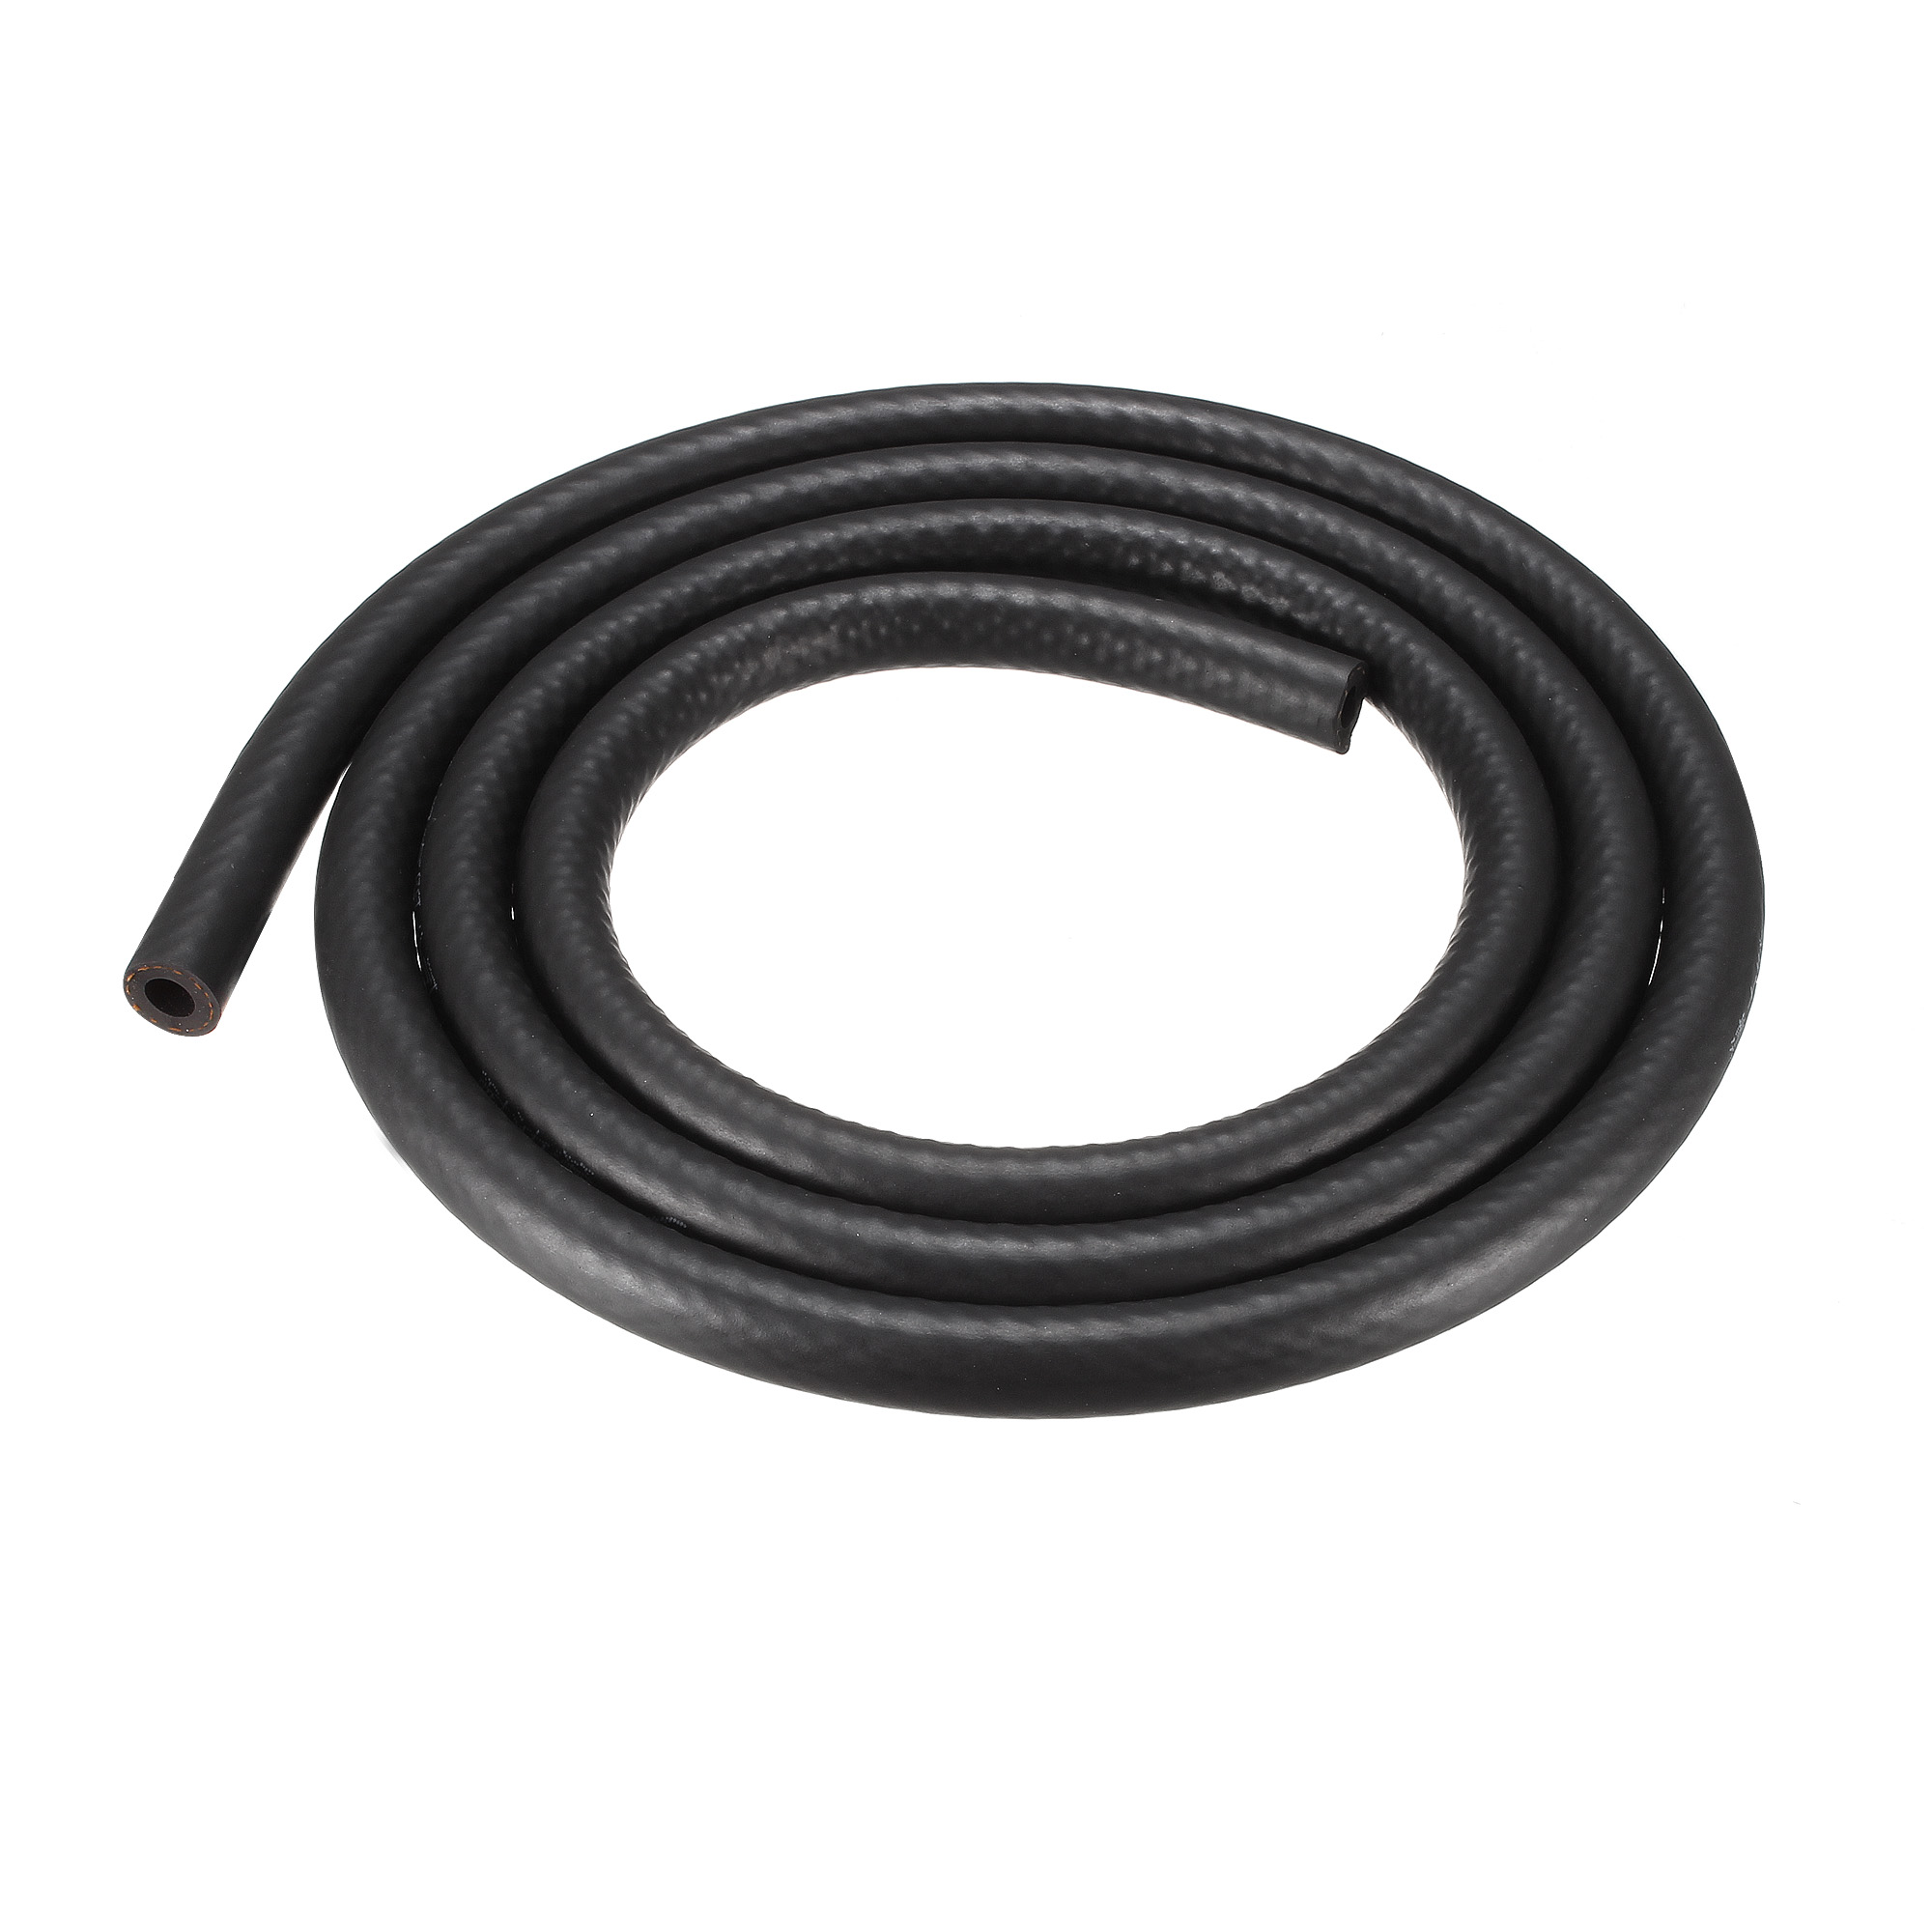 1 3//16 inch OD 5ft Black Oil Hose for Small Engines uxcell 3//4 inch ID Fuel Line Hose